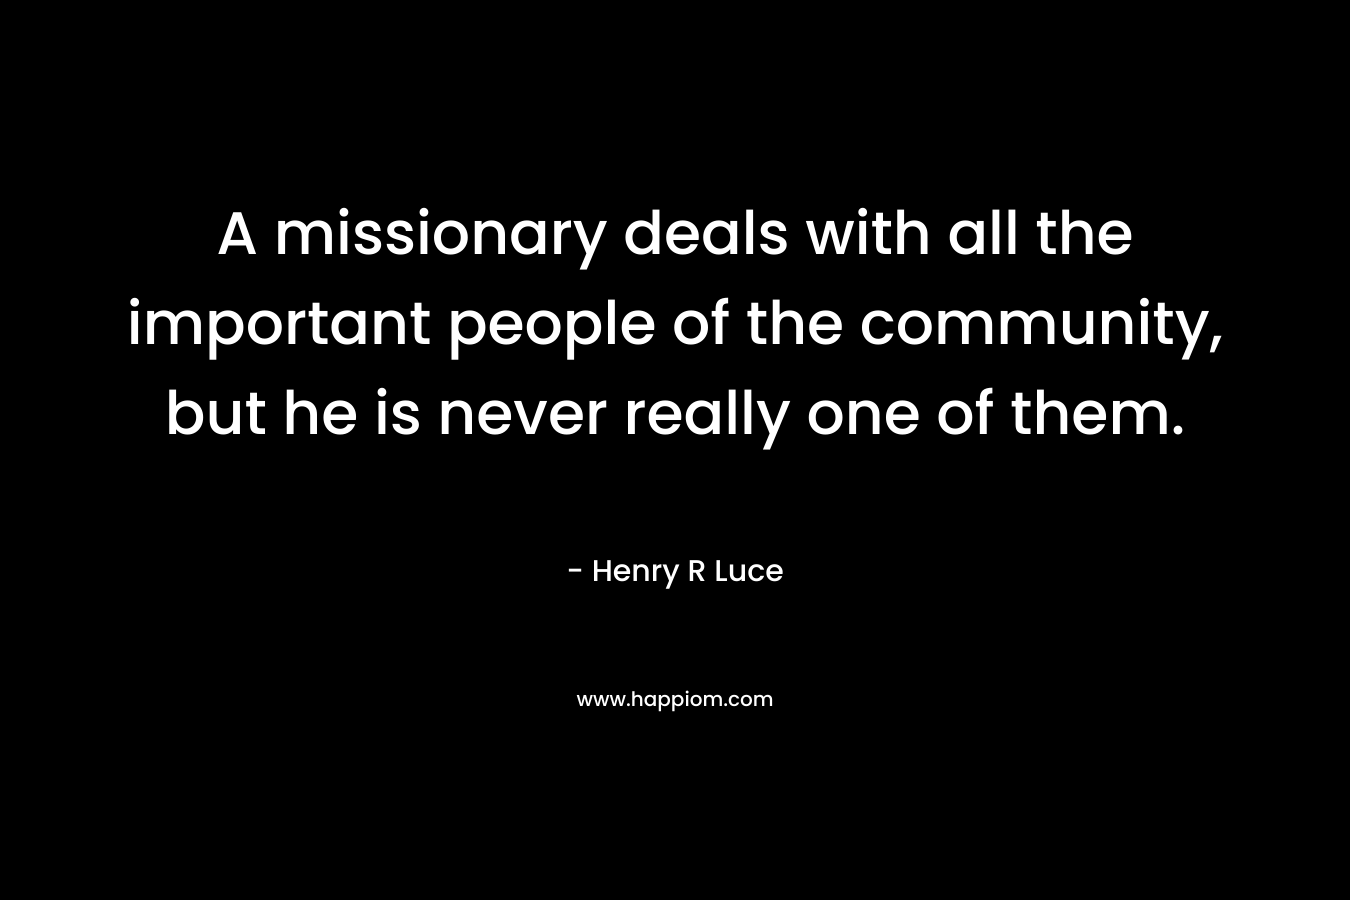 A missionary deals with all the important people of the community, but he is never really one of them. – Henry R Luce